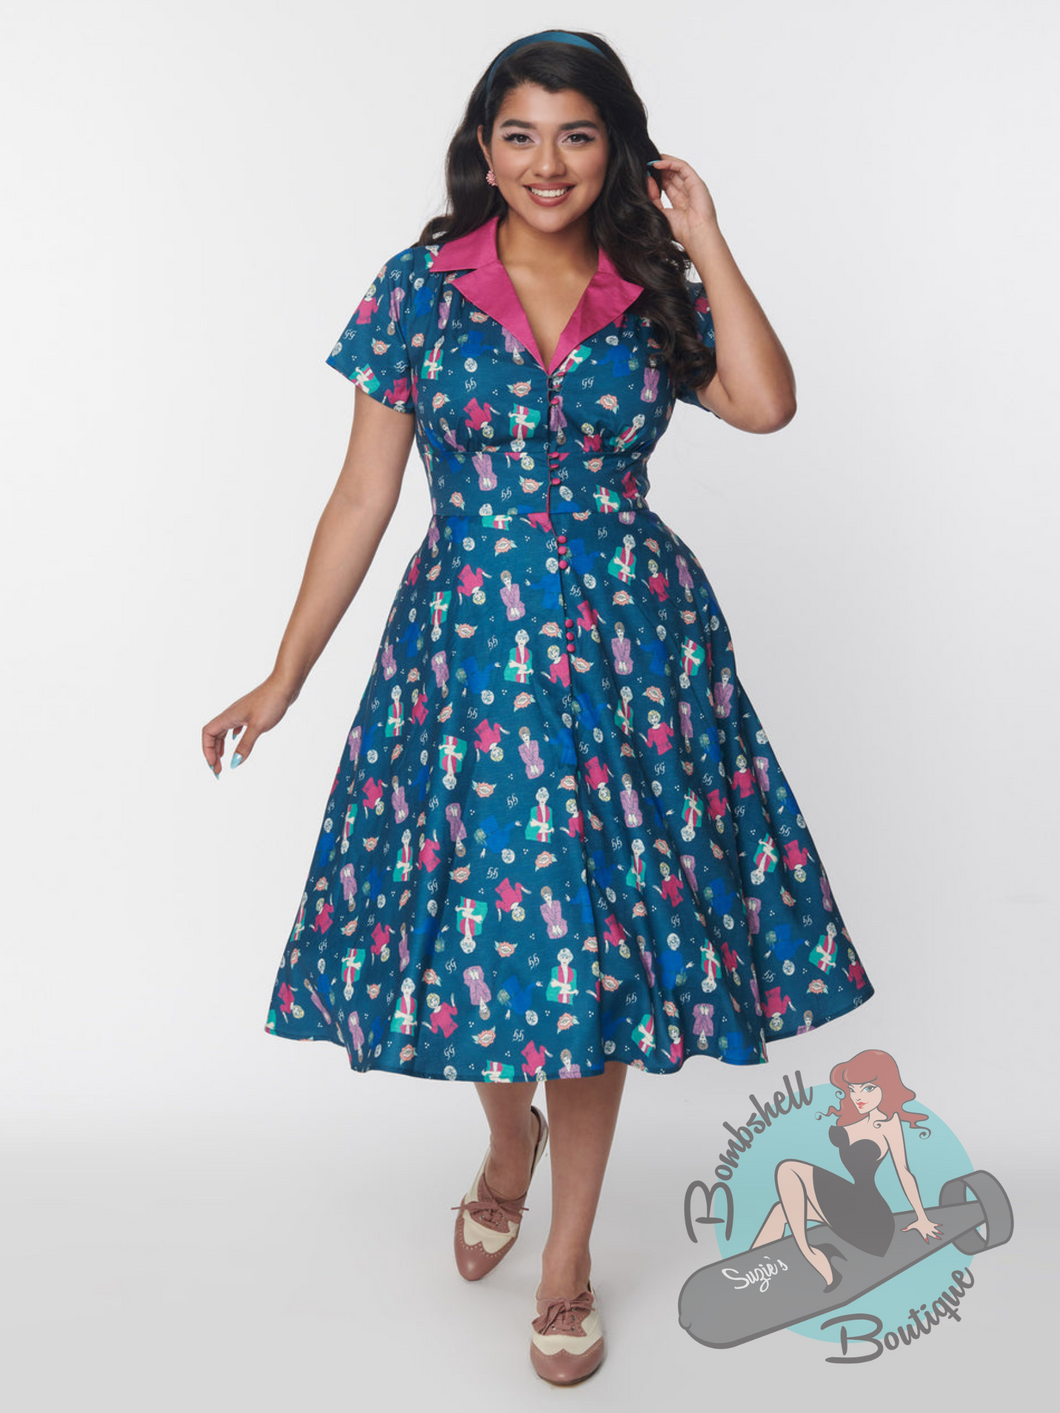 1950s style pin up swing dress in teal with accenting pink collar and all over print of the Golden Girls. This nostalgic dress has pockets.